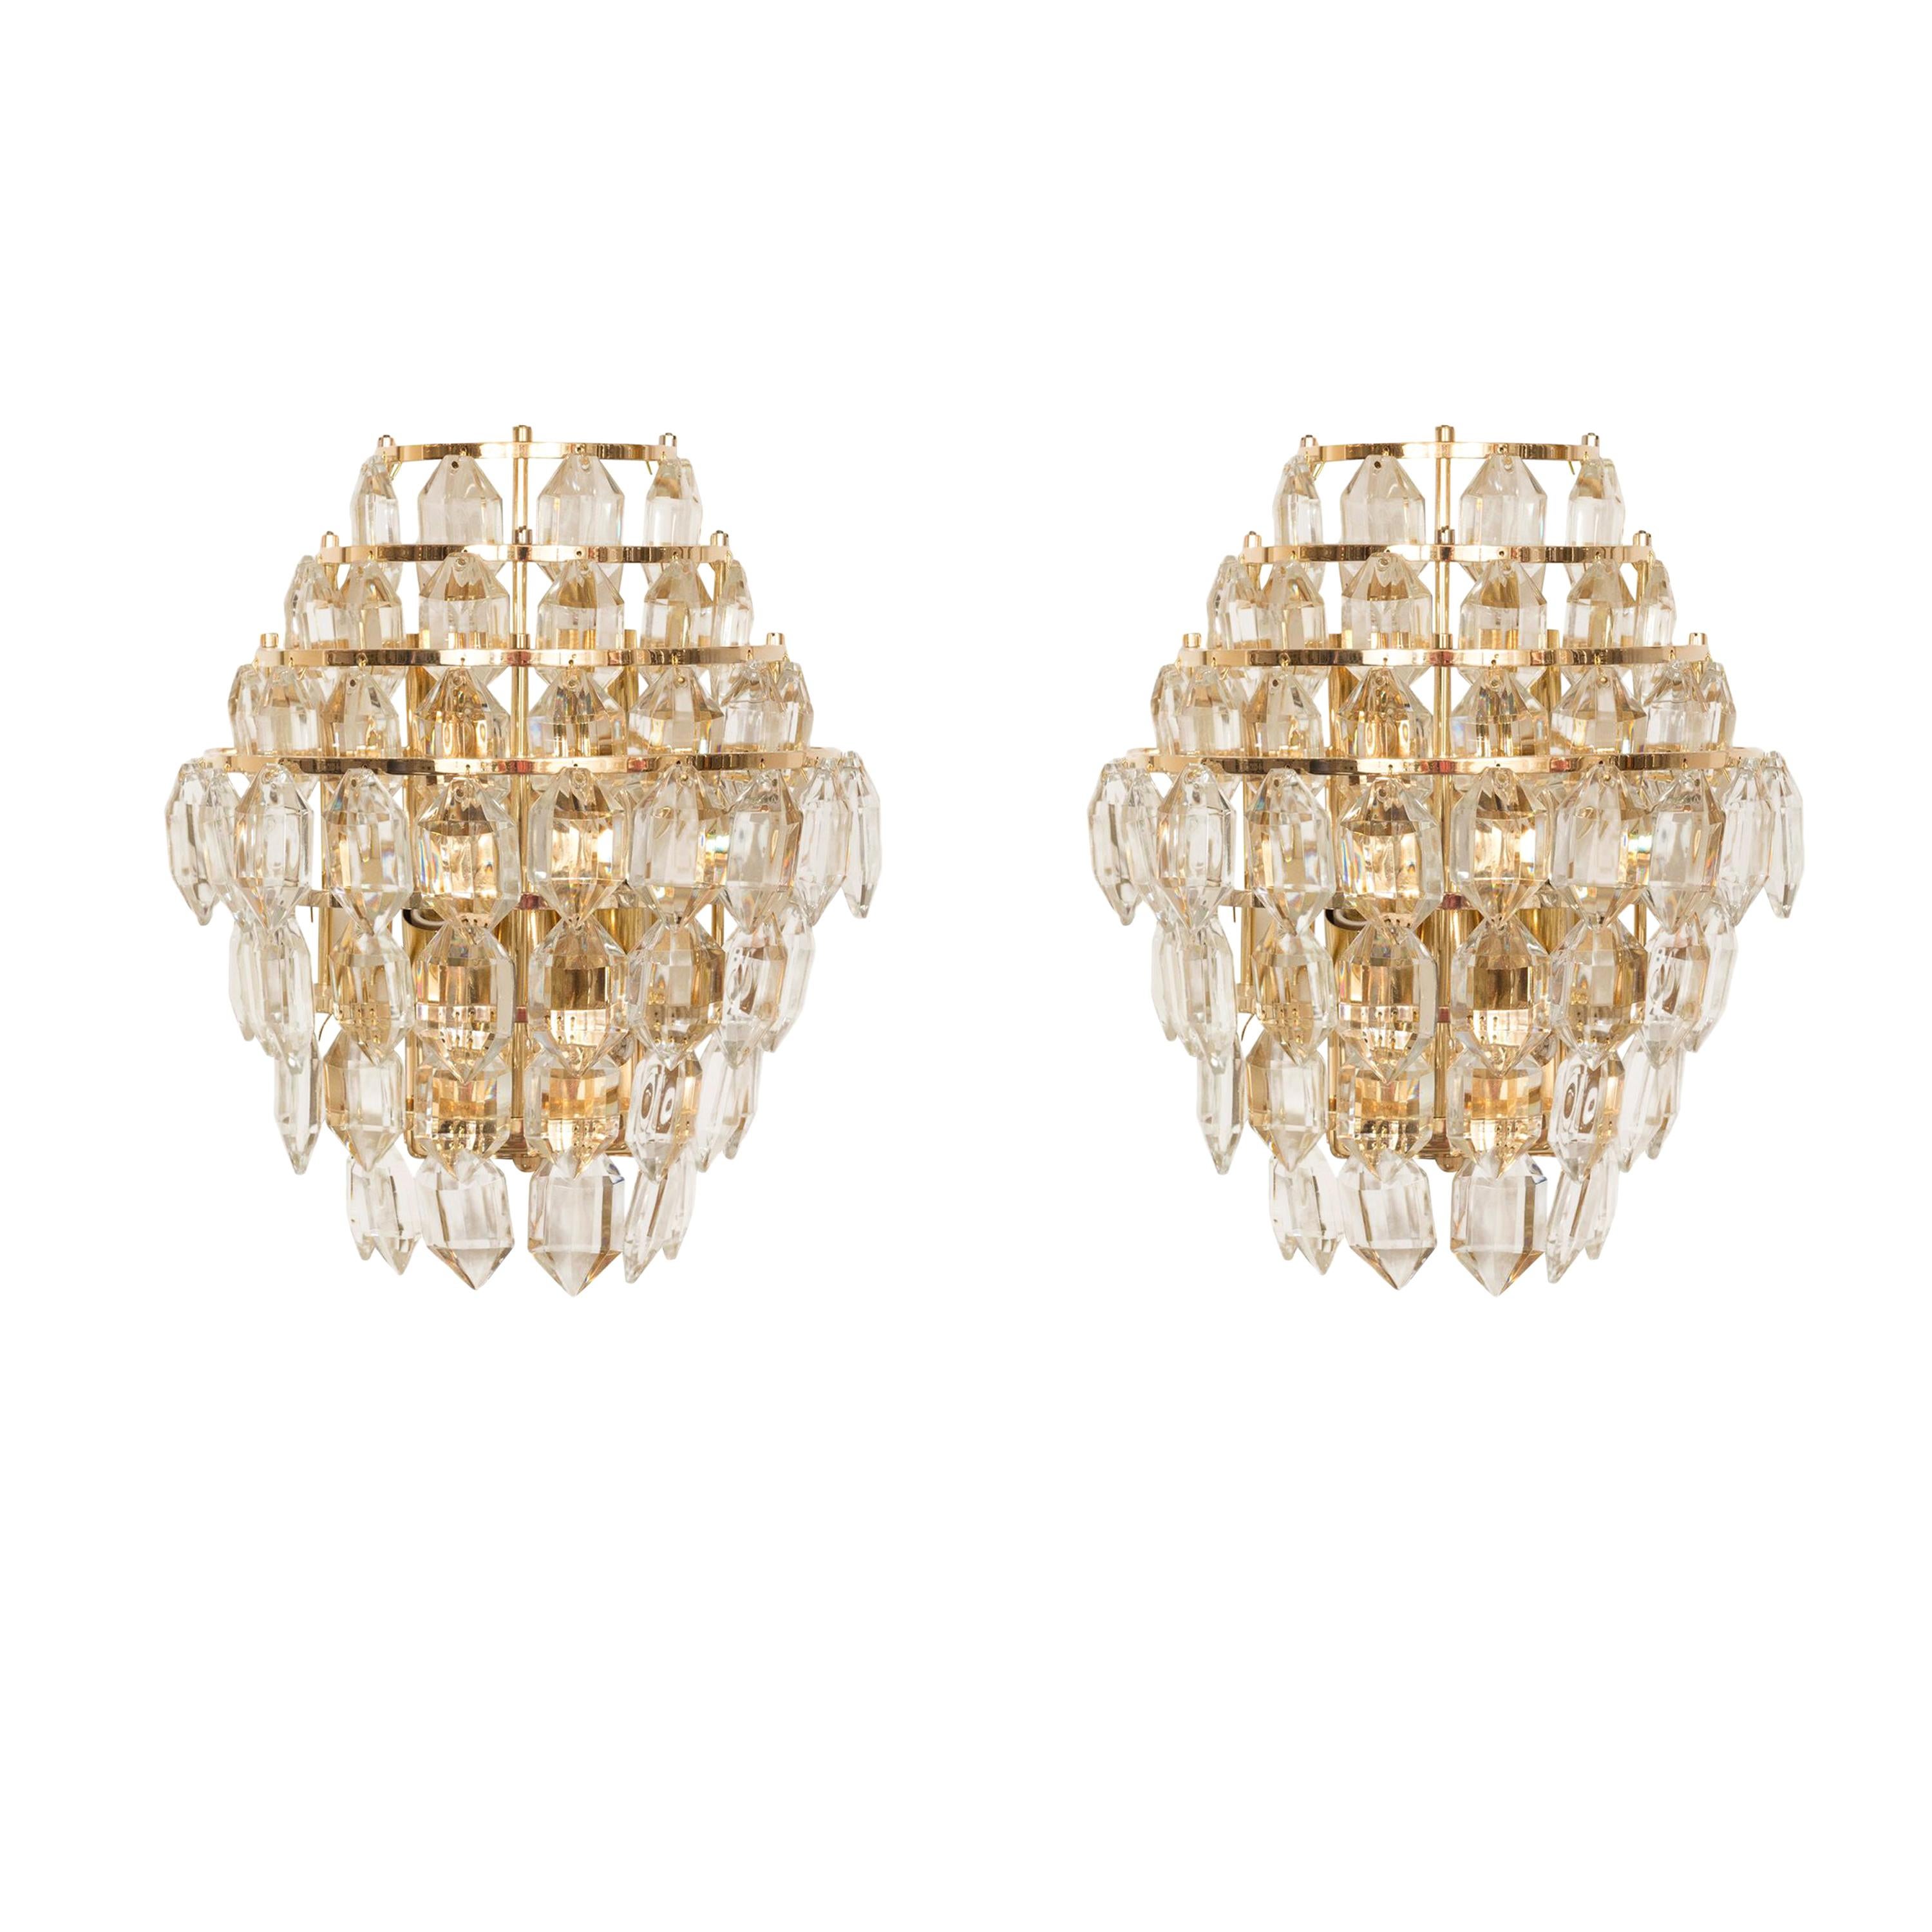 Bakalowits Wall Sconce Brass and Crystal Glass, Austria, 1960s